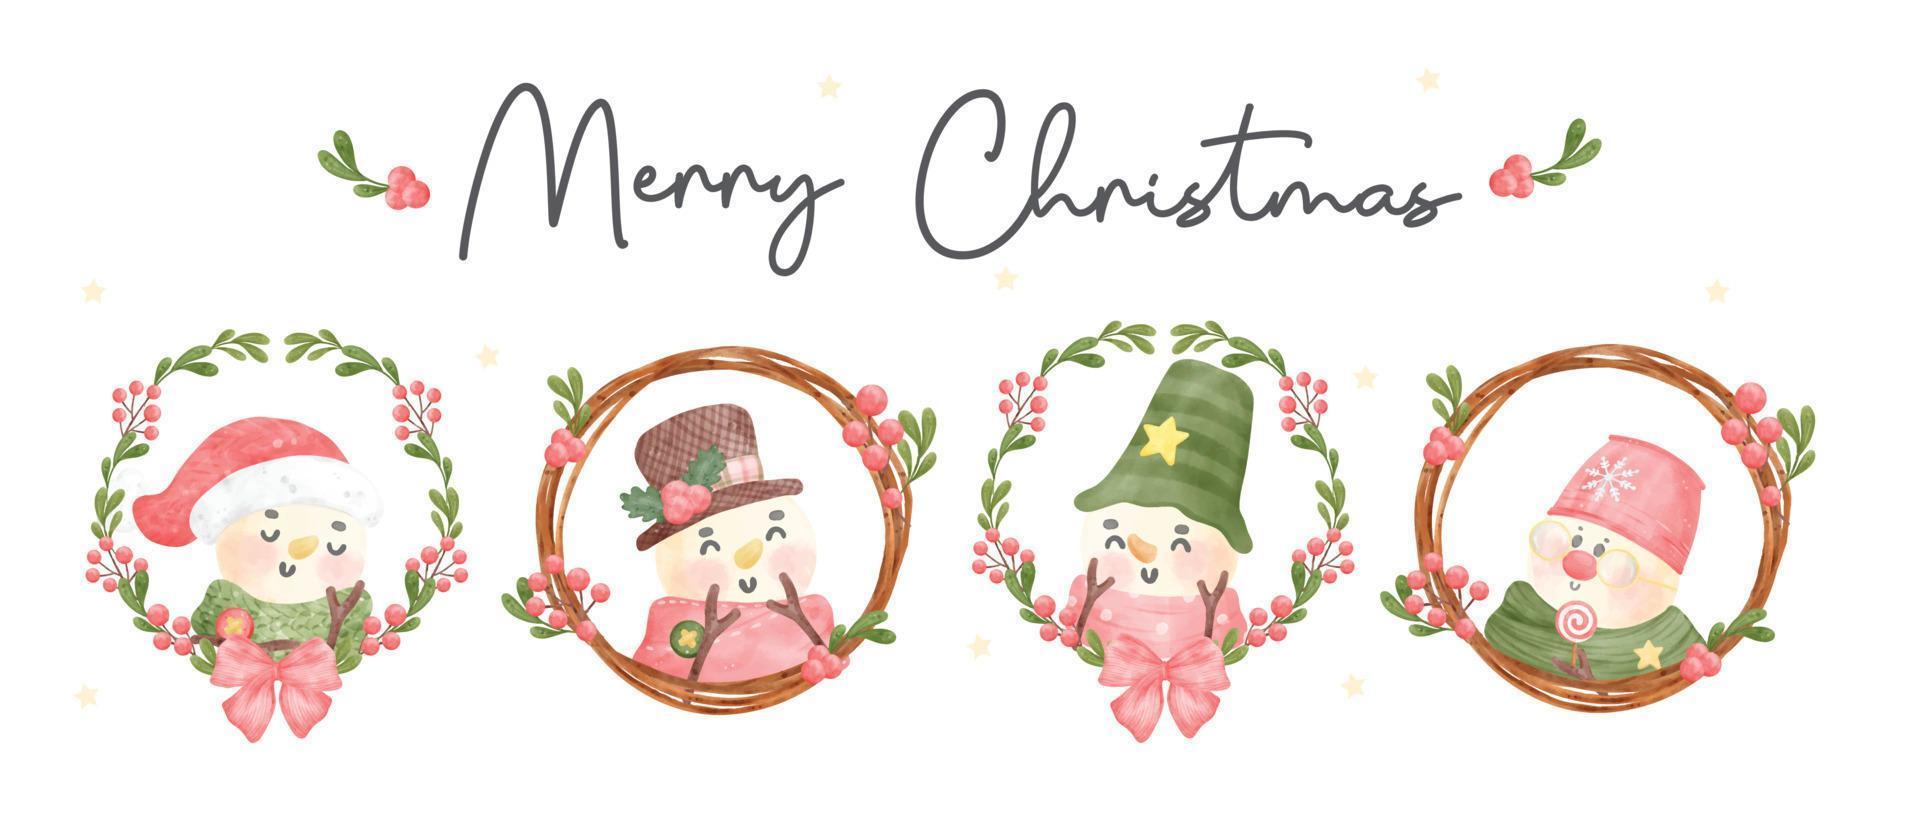 group of 4 cute Christmas Snowman Character in wreath set banner watercolour cartoon hand painting illustration vector